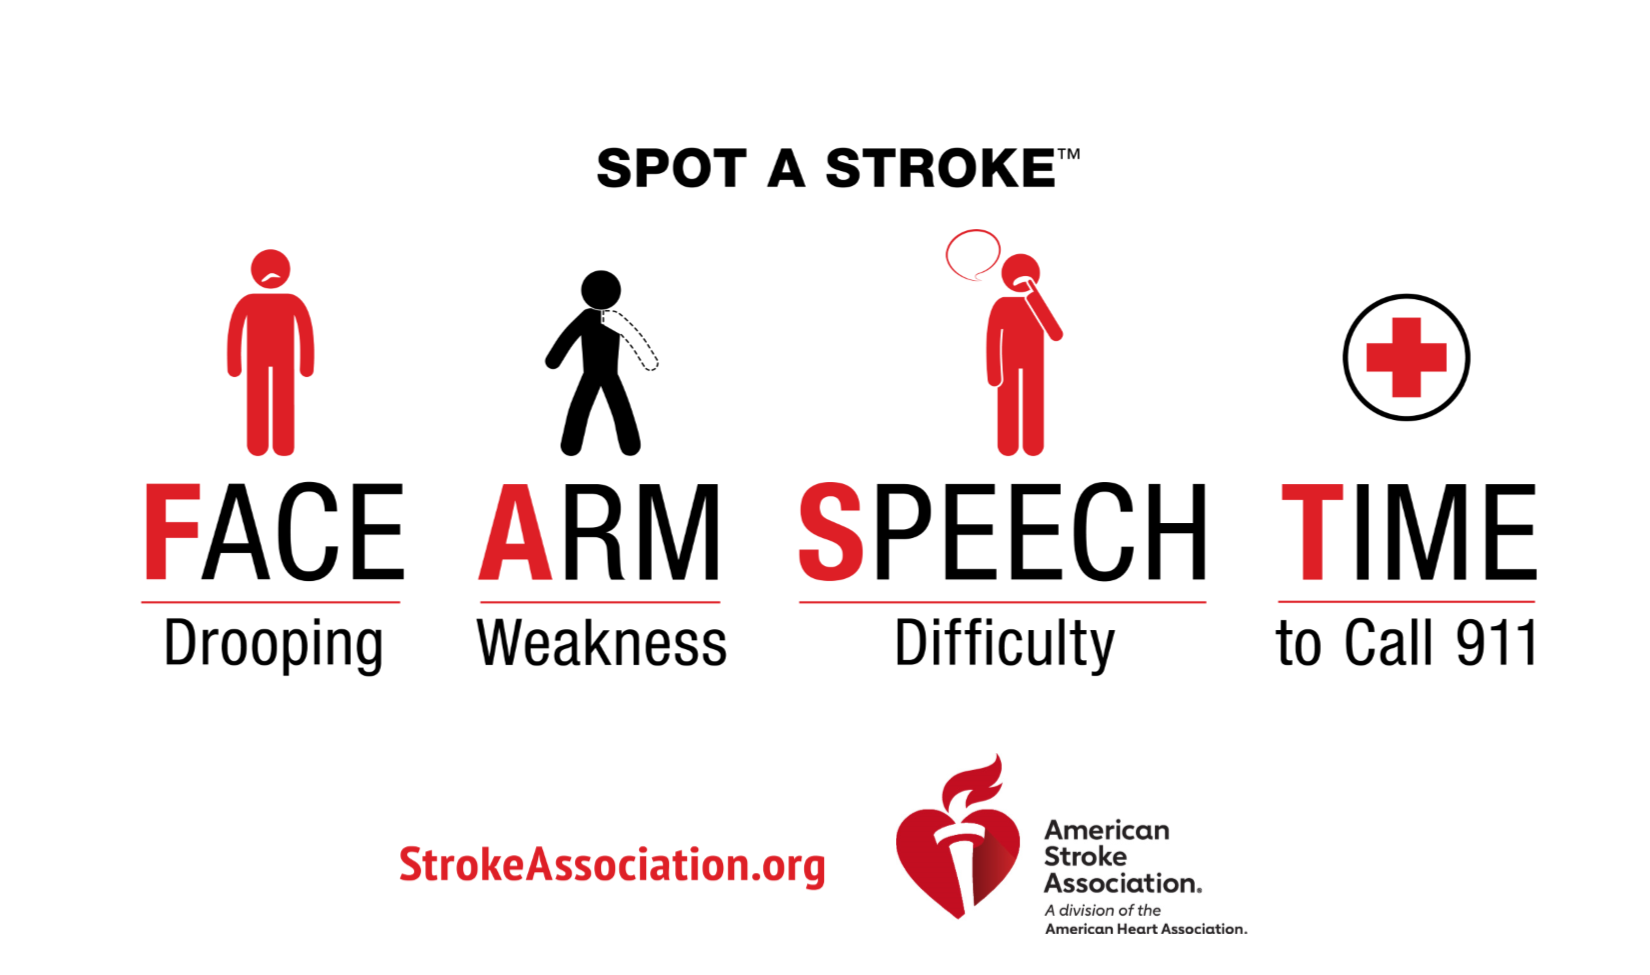 American Stroke Association offers tips to improve wellness and prevent stroke